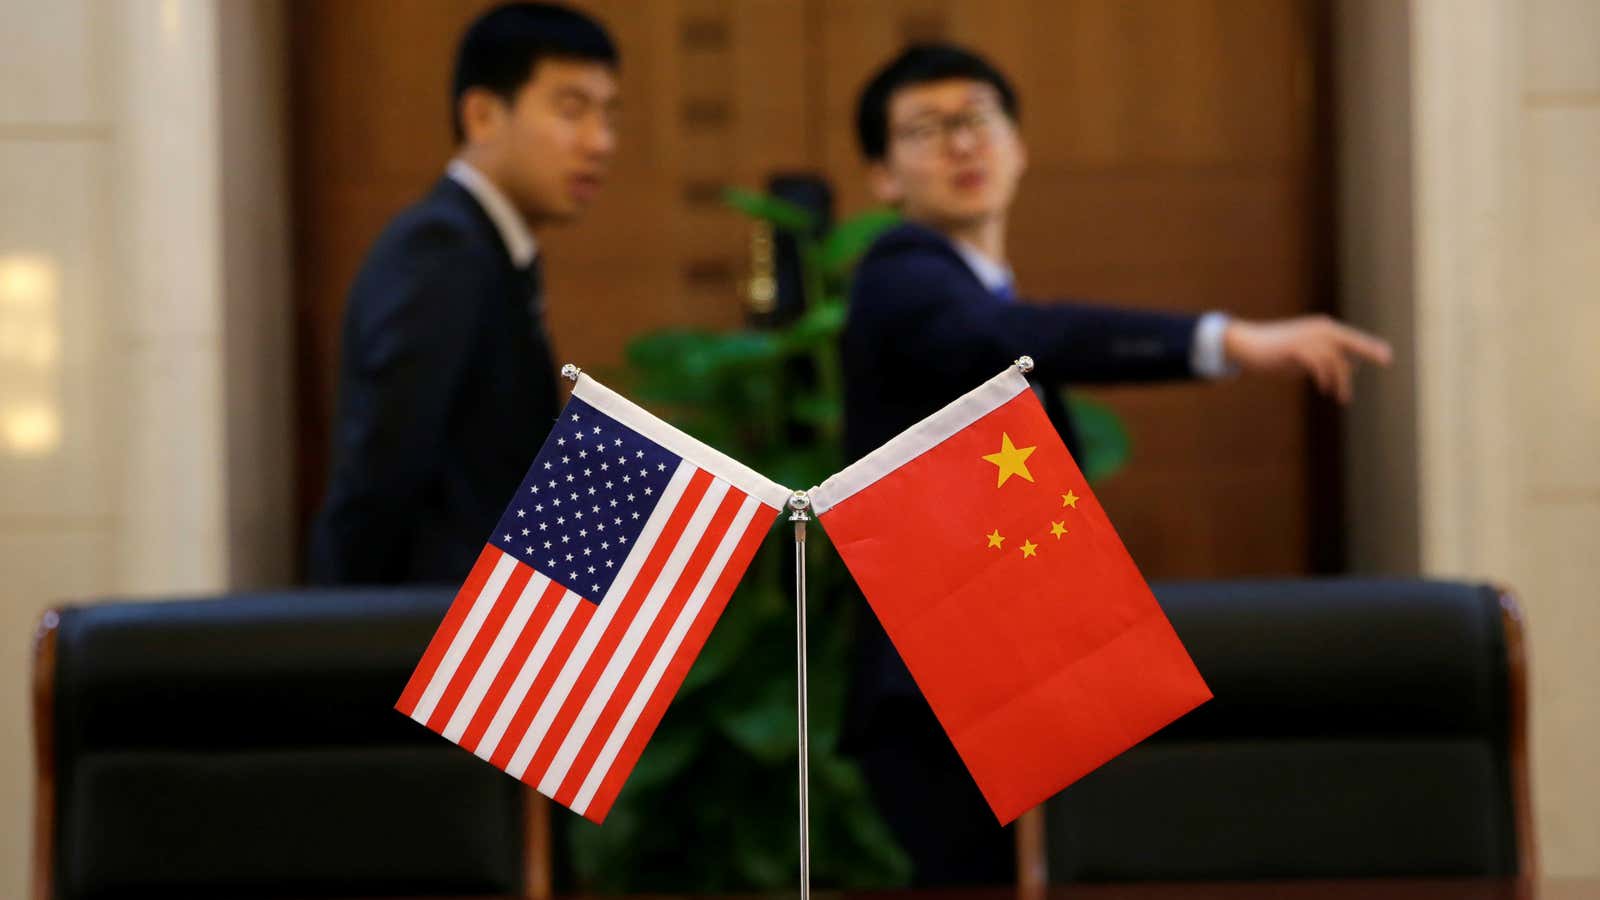 The US is altering its visa policies to stem China’s advancement in STEM